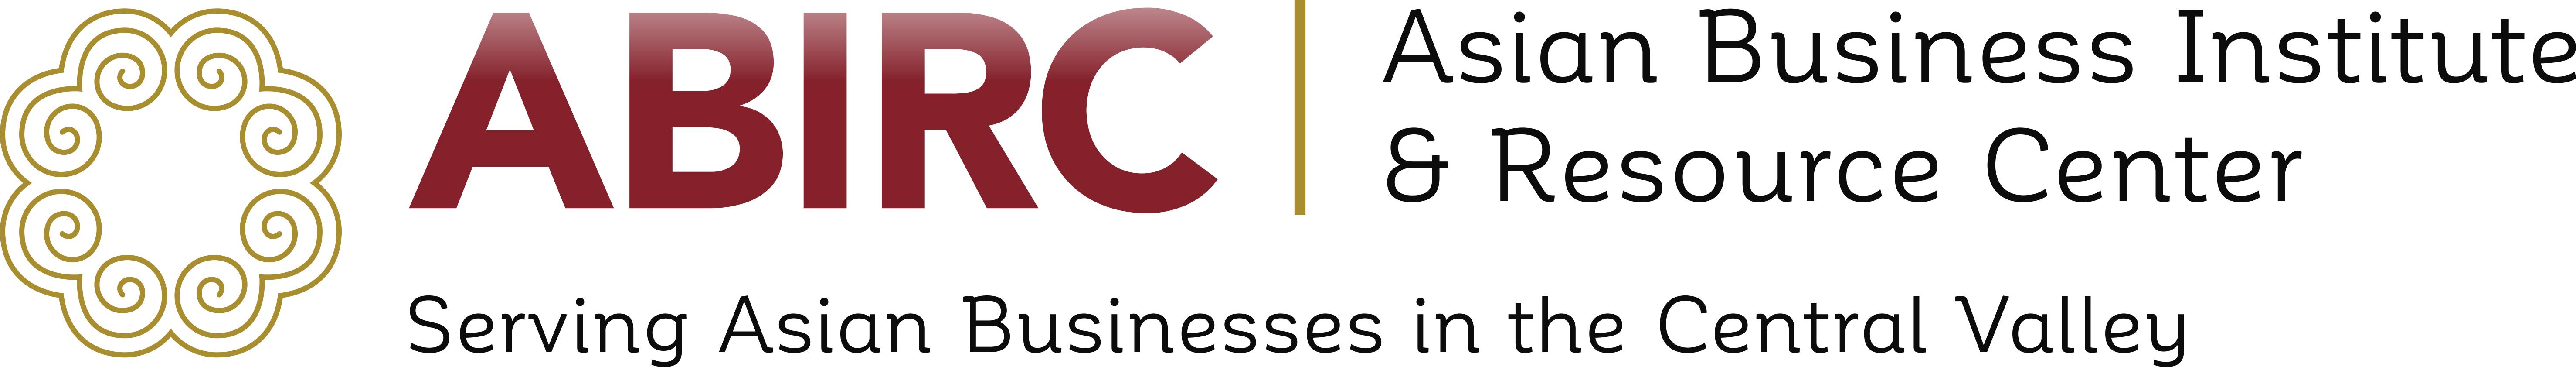 Fresno Asian Business Institute and Resource Center